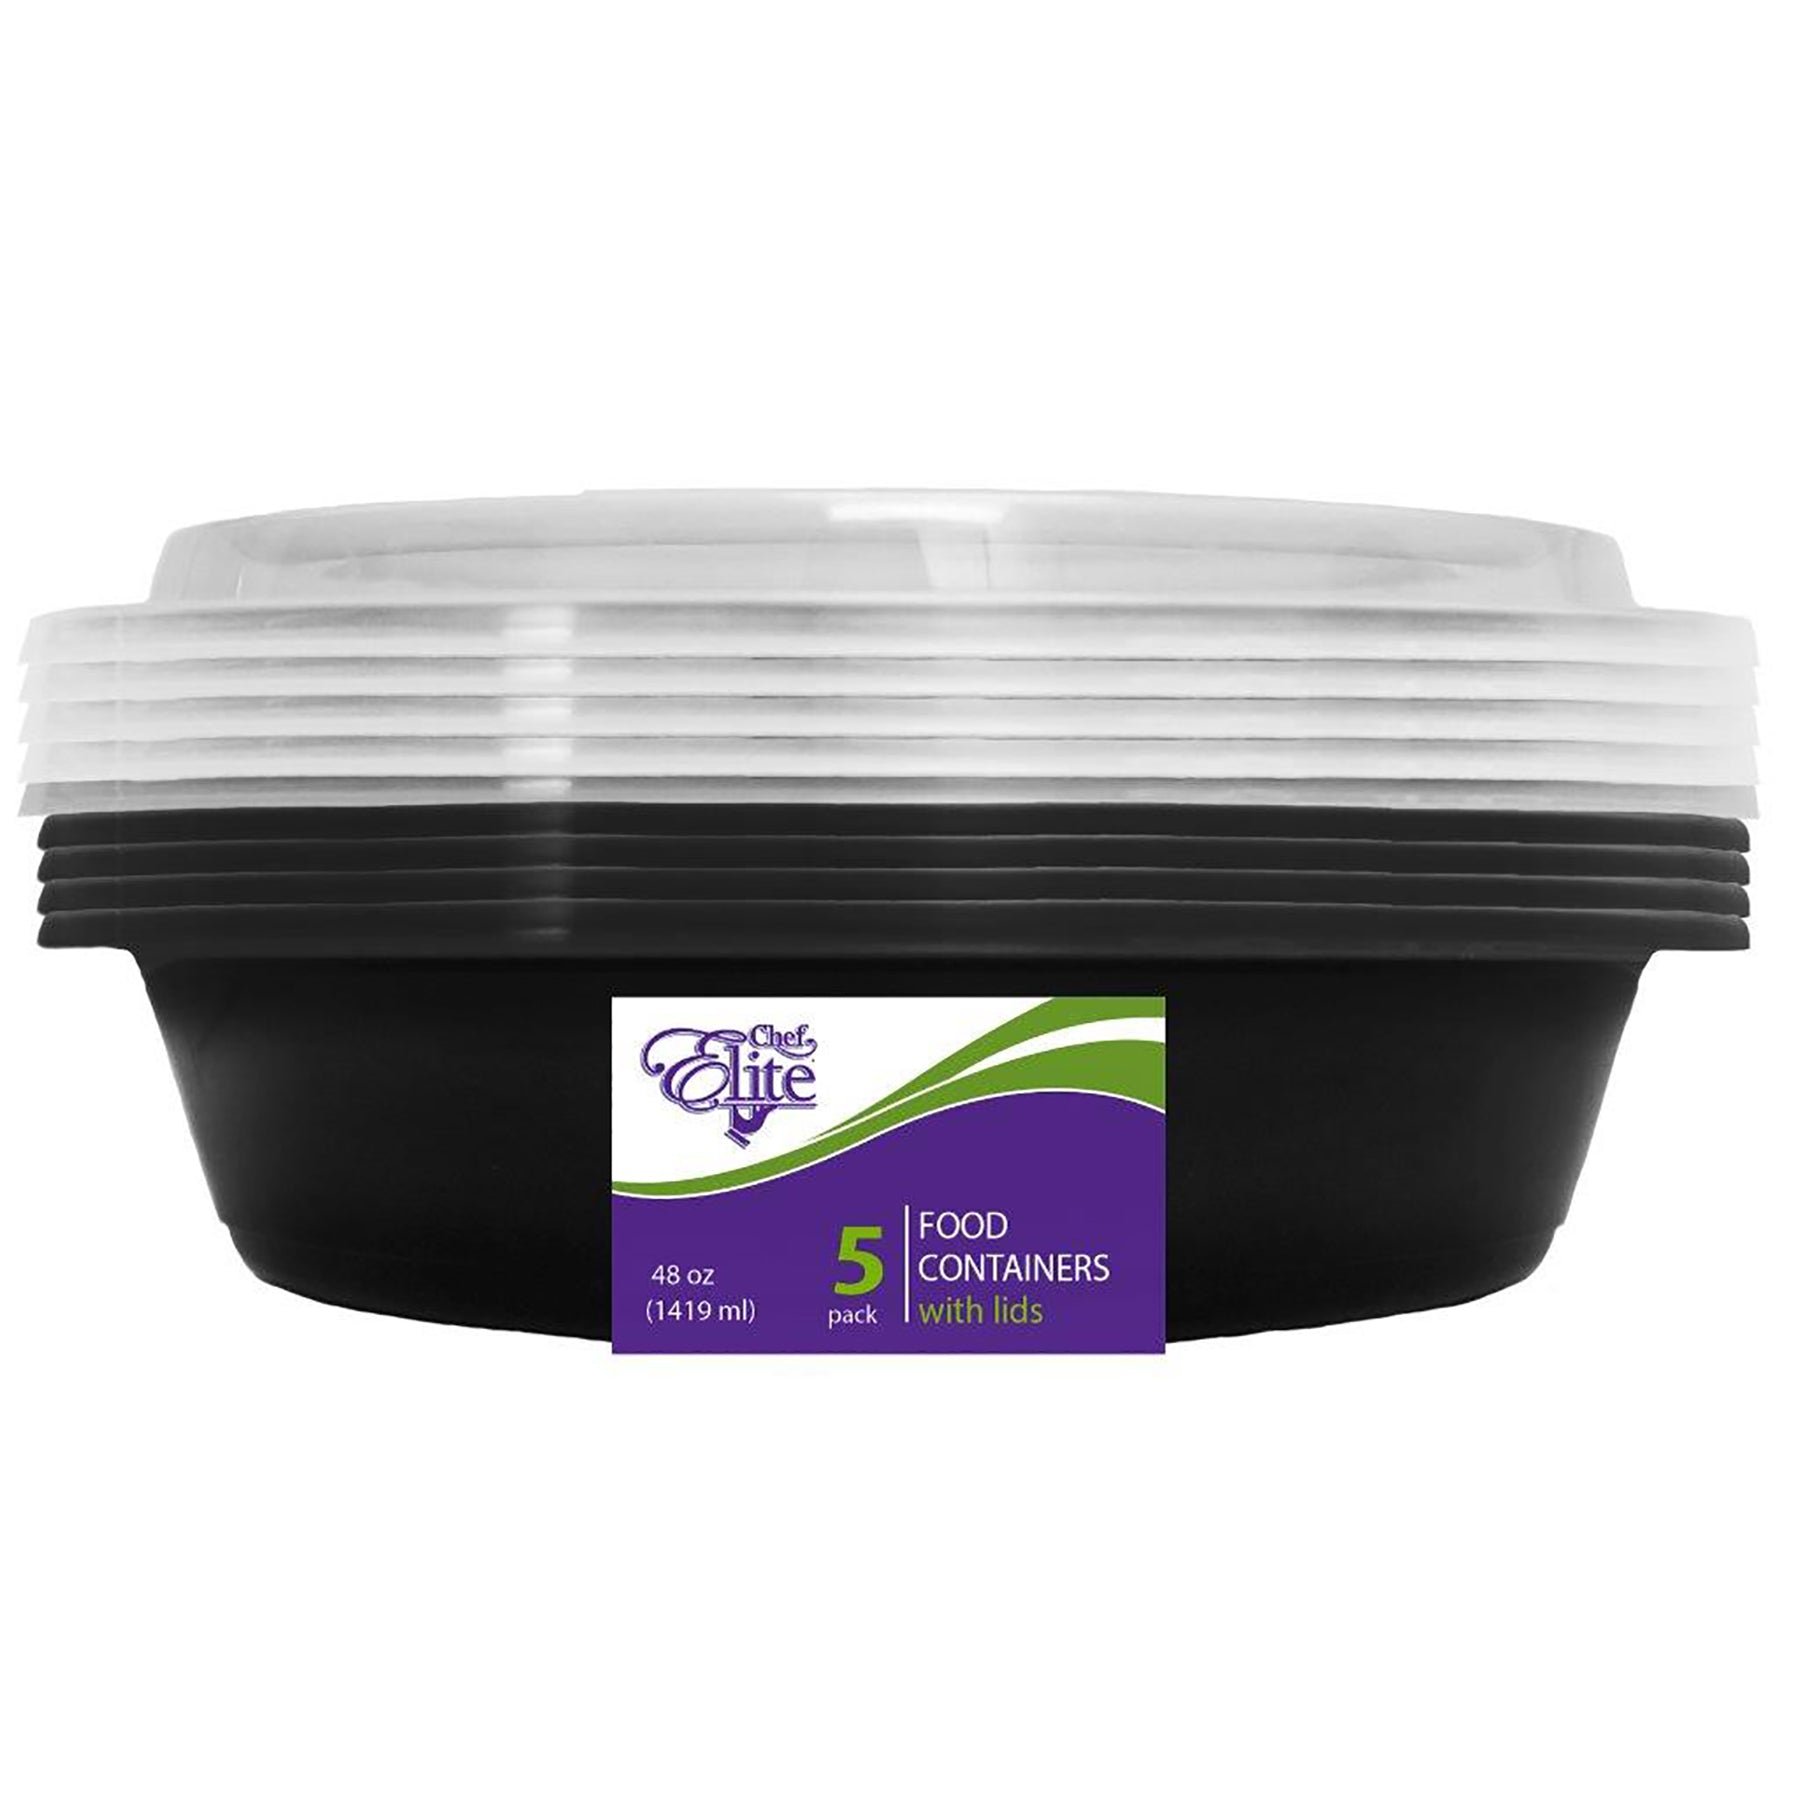 Chef Elite 5 Containers with Lids Black Round Plastic 48oz